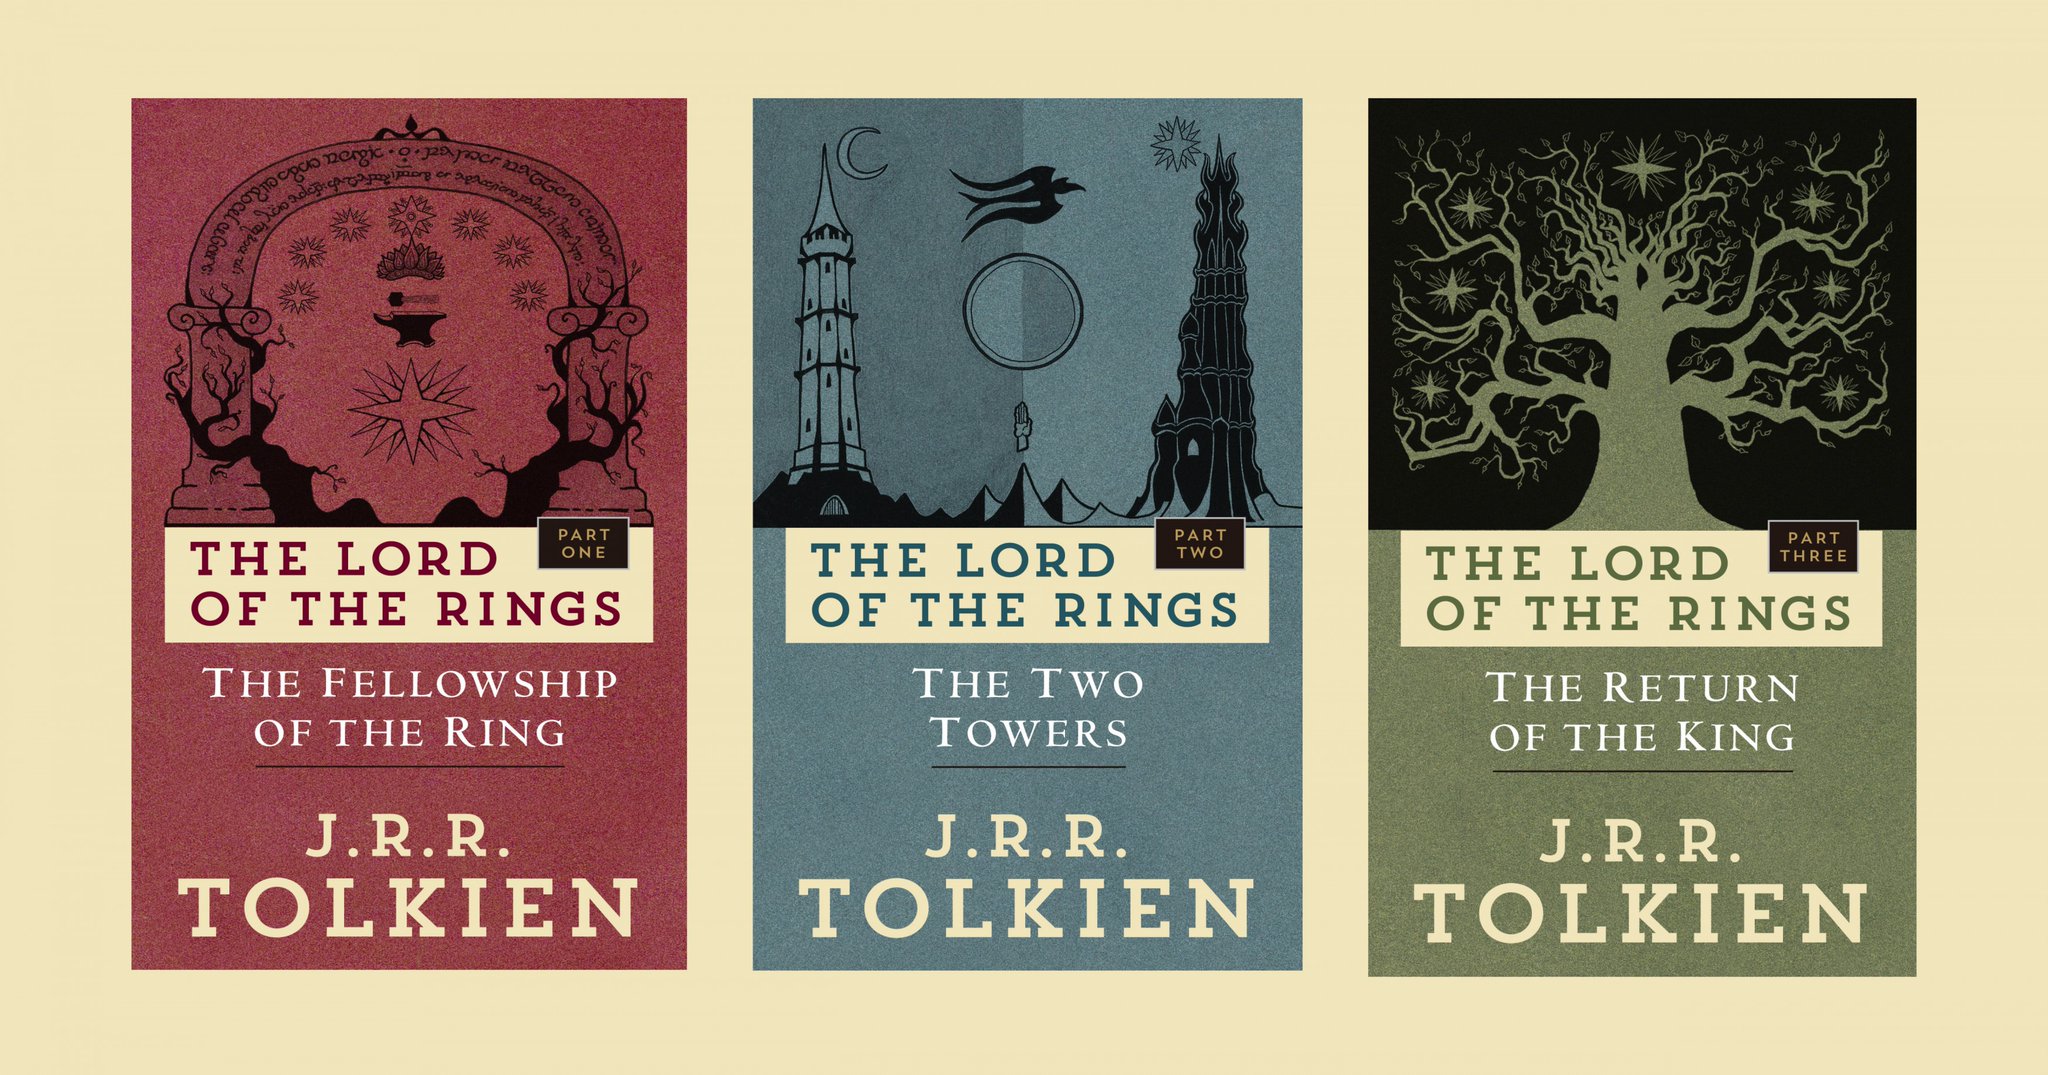 TCG - Del Rey reveals new covers for The Lord of the Rings ...